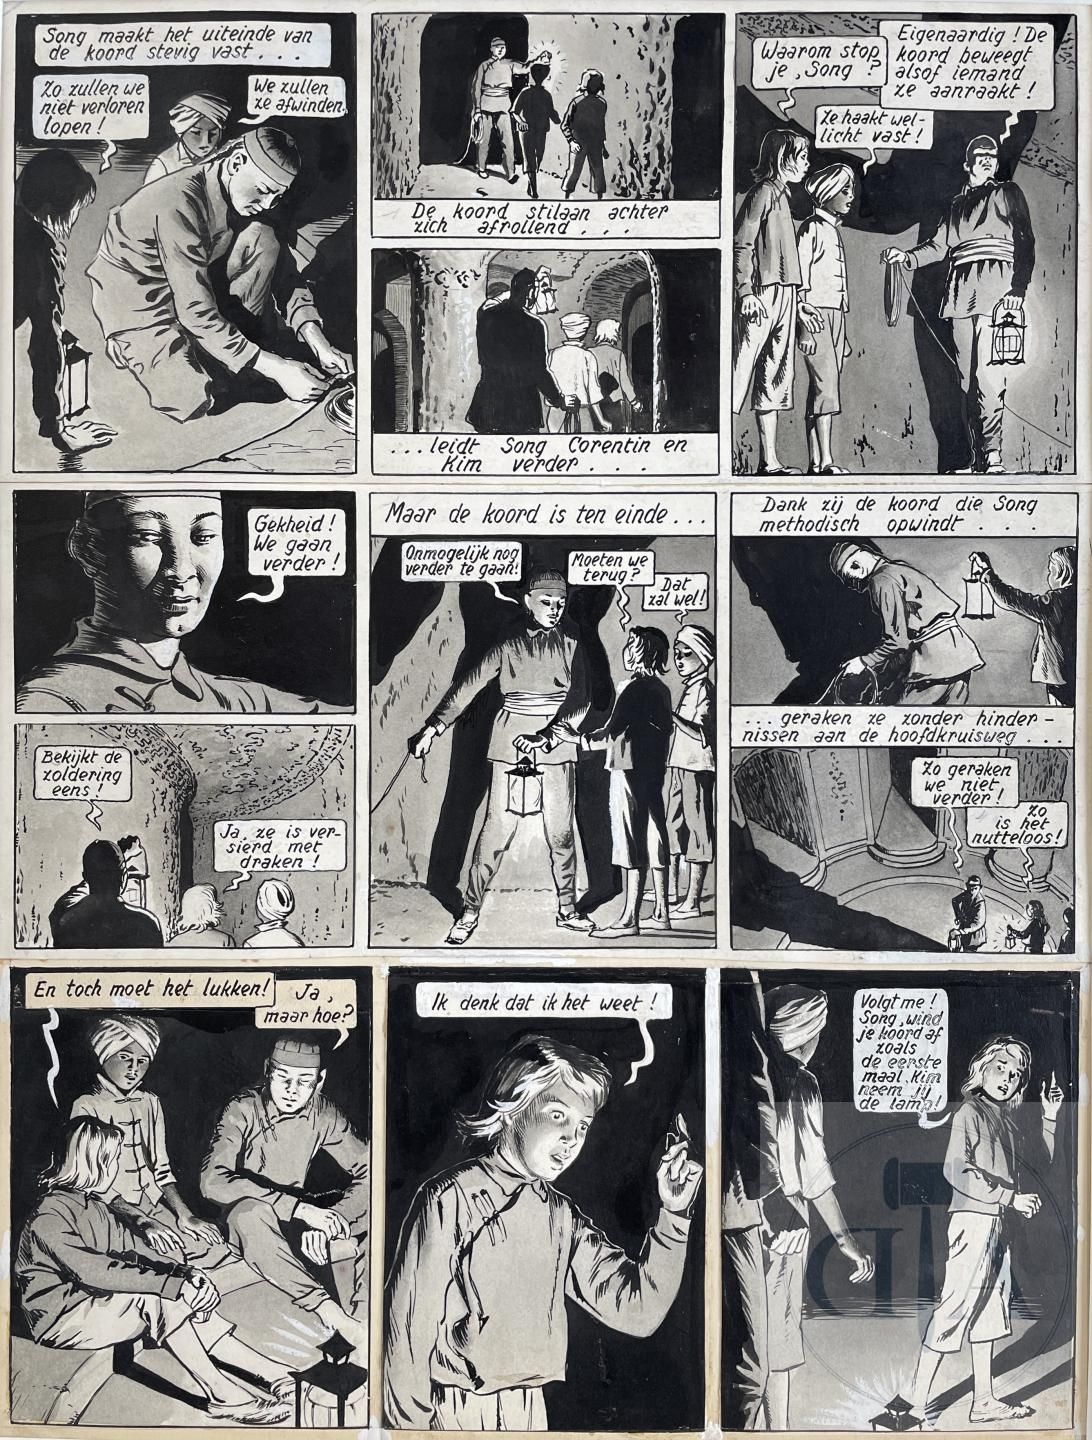 Original art from the album T2 "Les nouvelles aventures de Corentin". The strip was first published in Tintin in December 1948